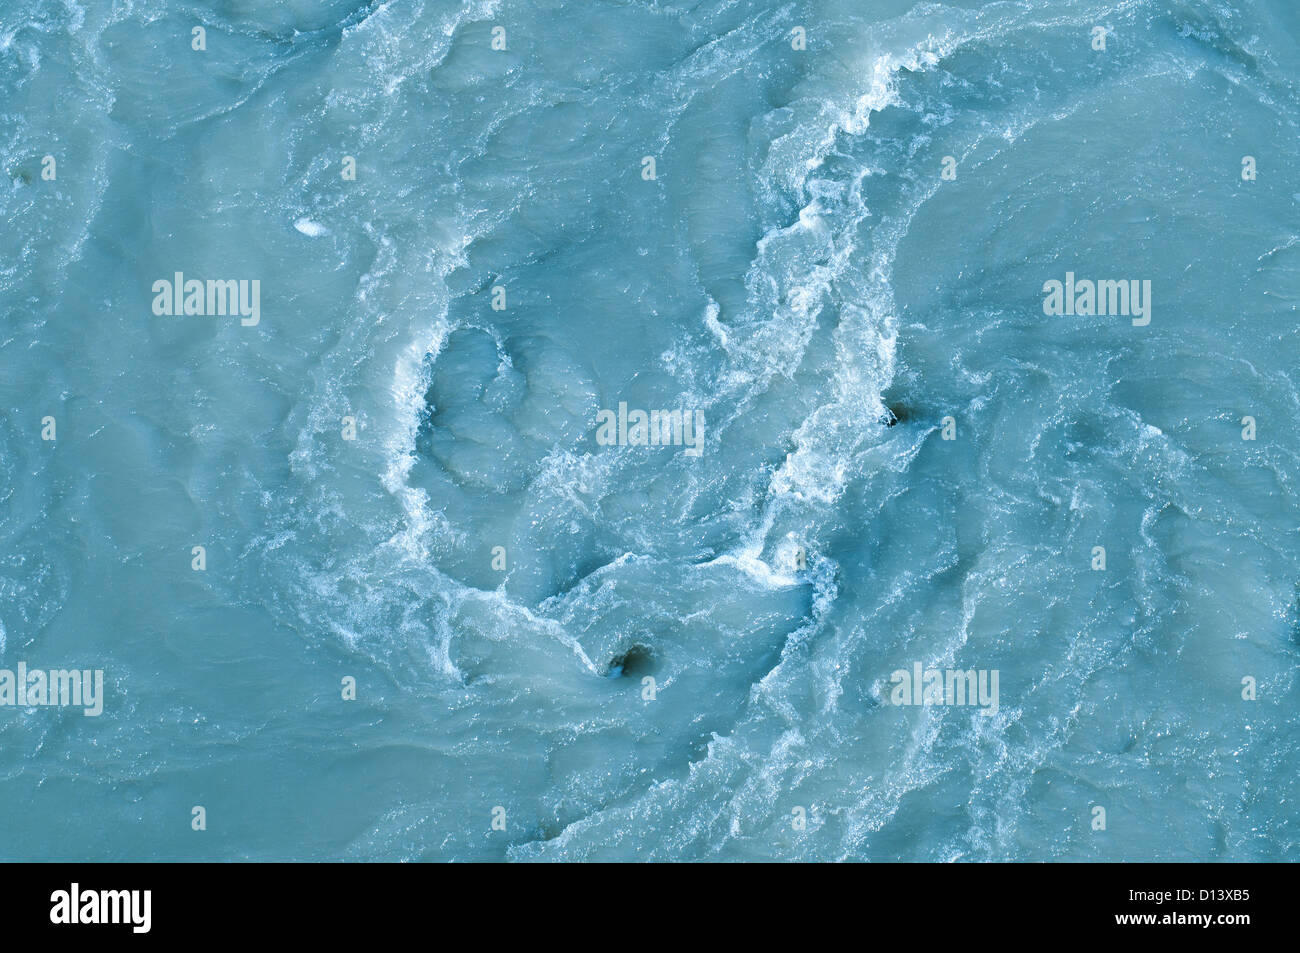 river stream water surface with swirl Stock Photo